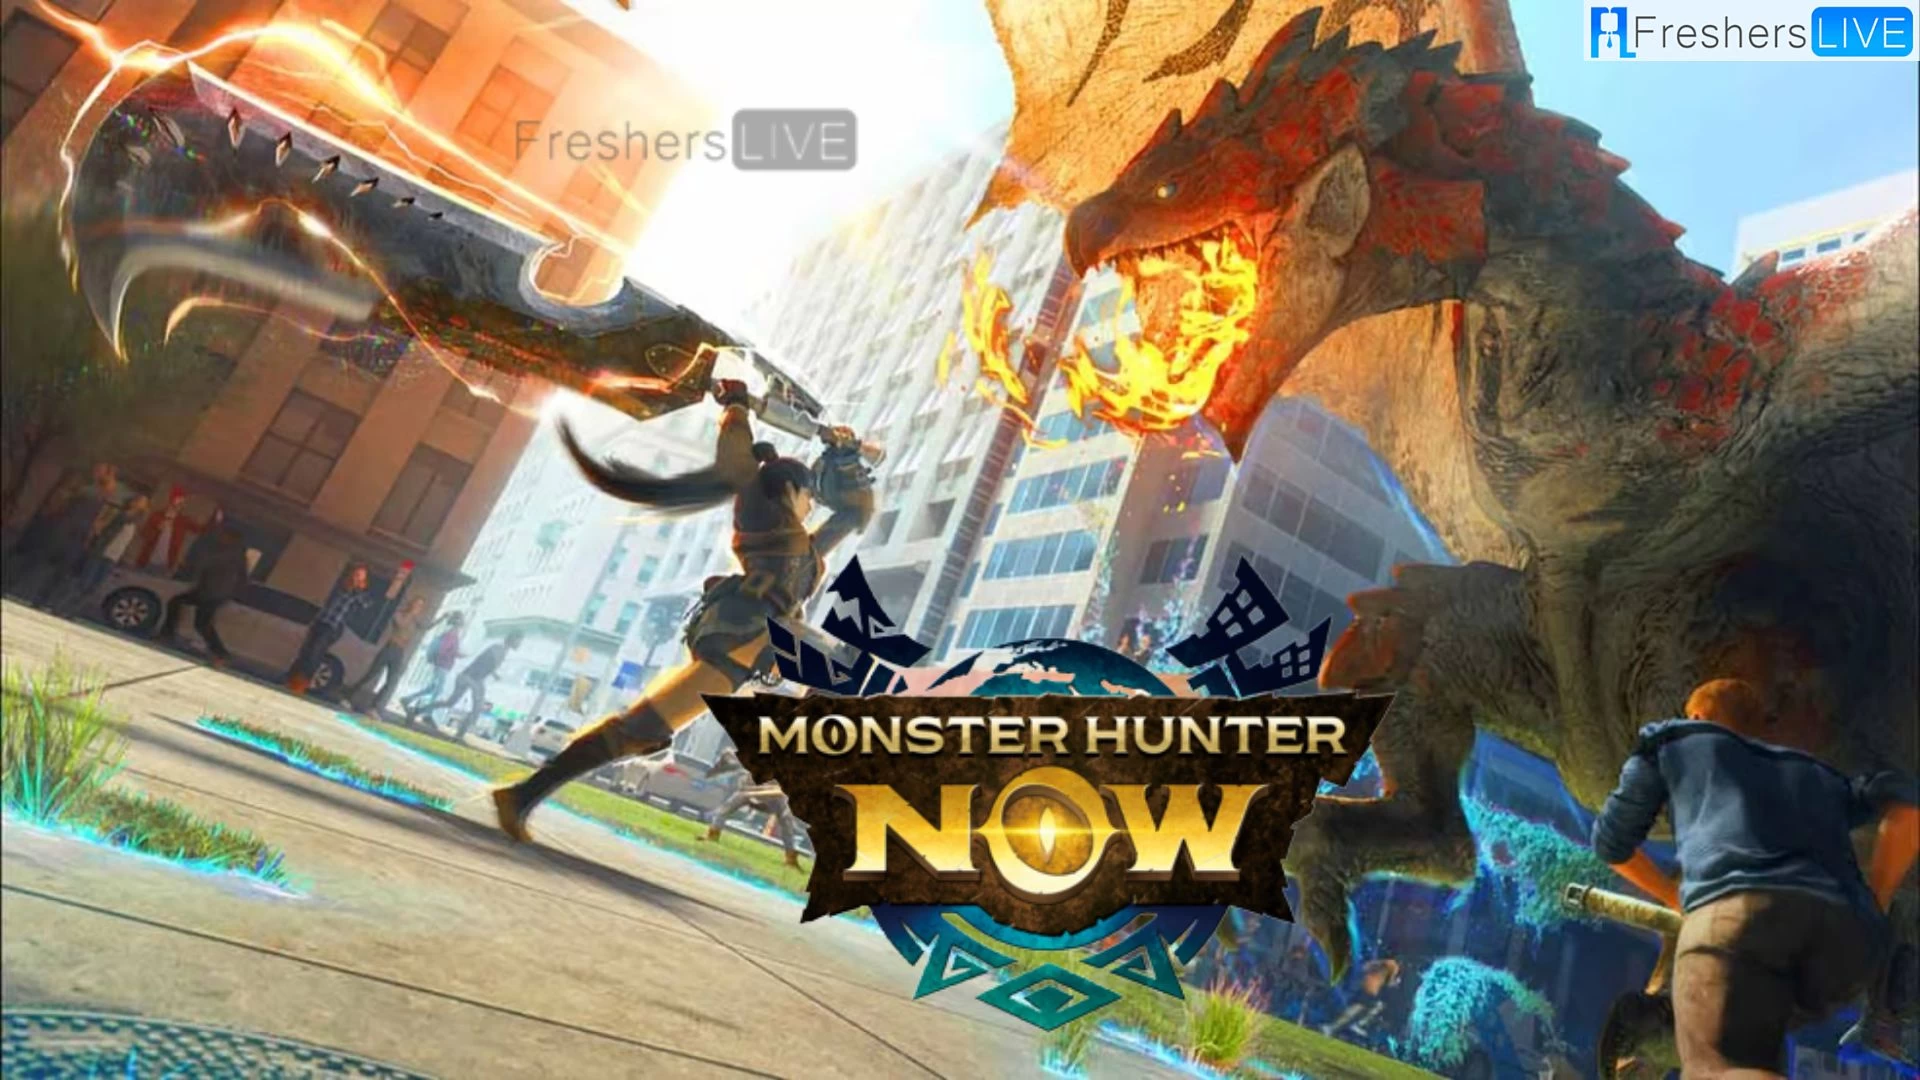 Monster Hunter Now Referral Code Where to Find? Monster Hunter Now Gameplay, Release Date and More